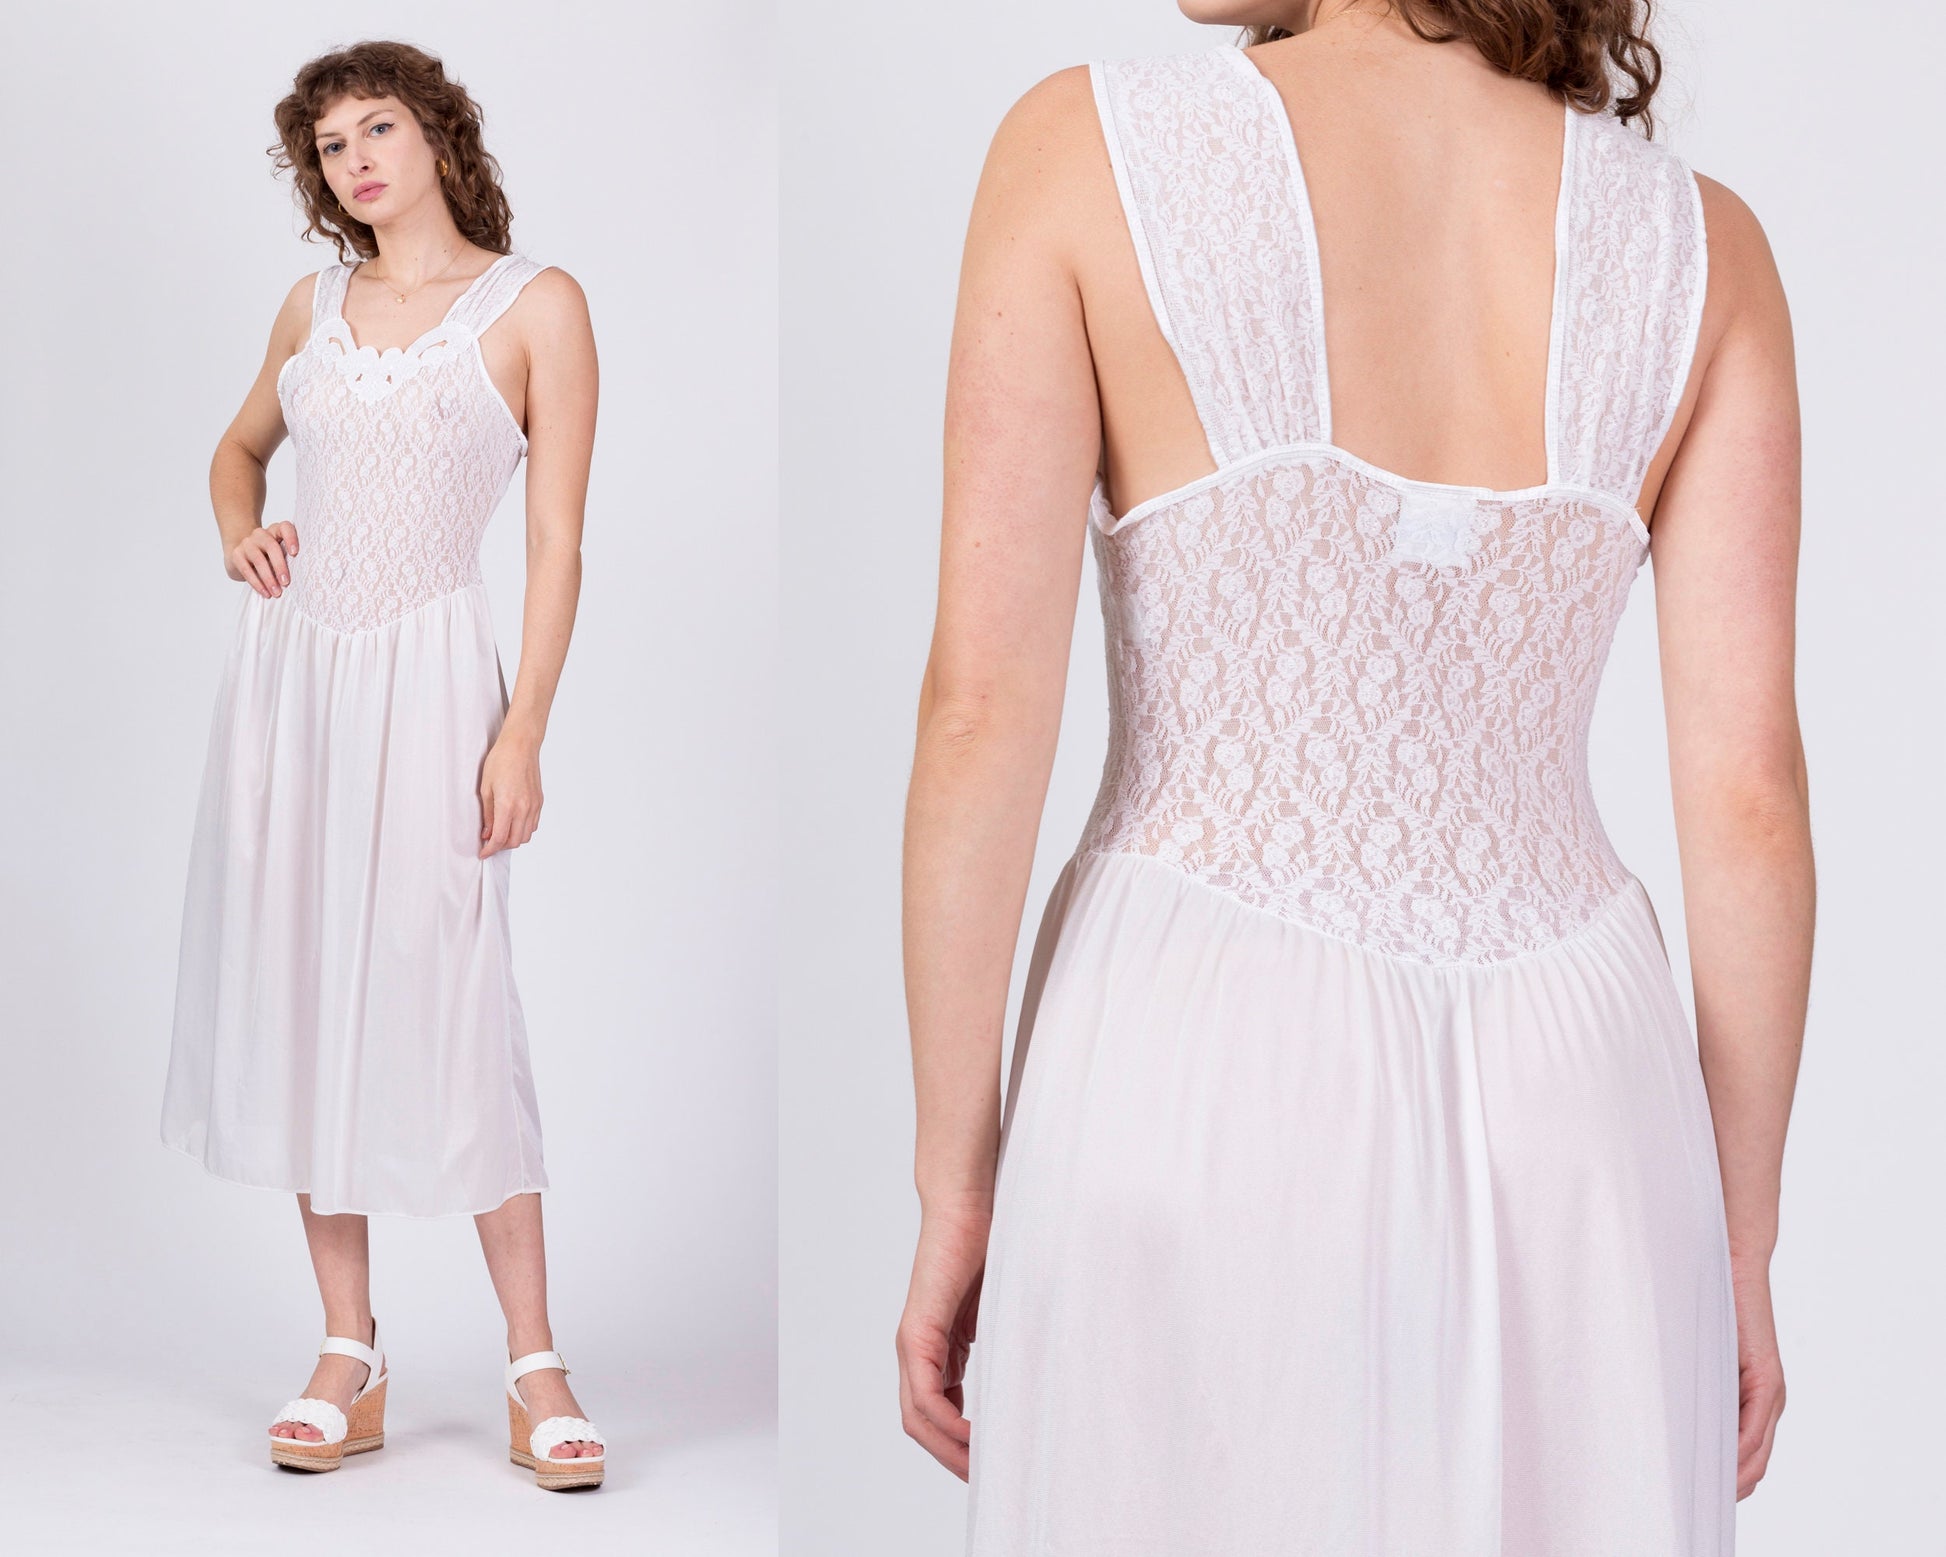 Choosing the right sheer nightgown 